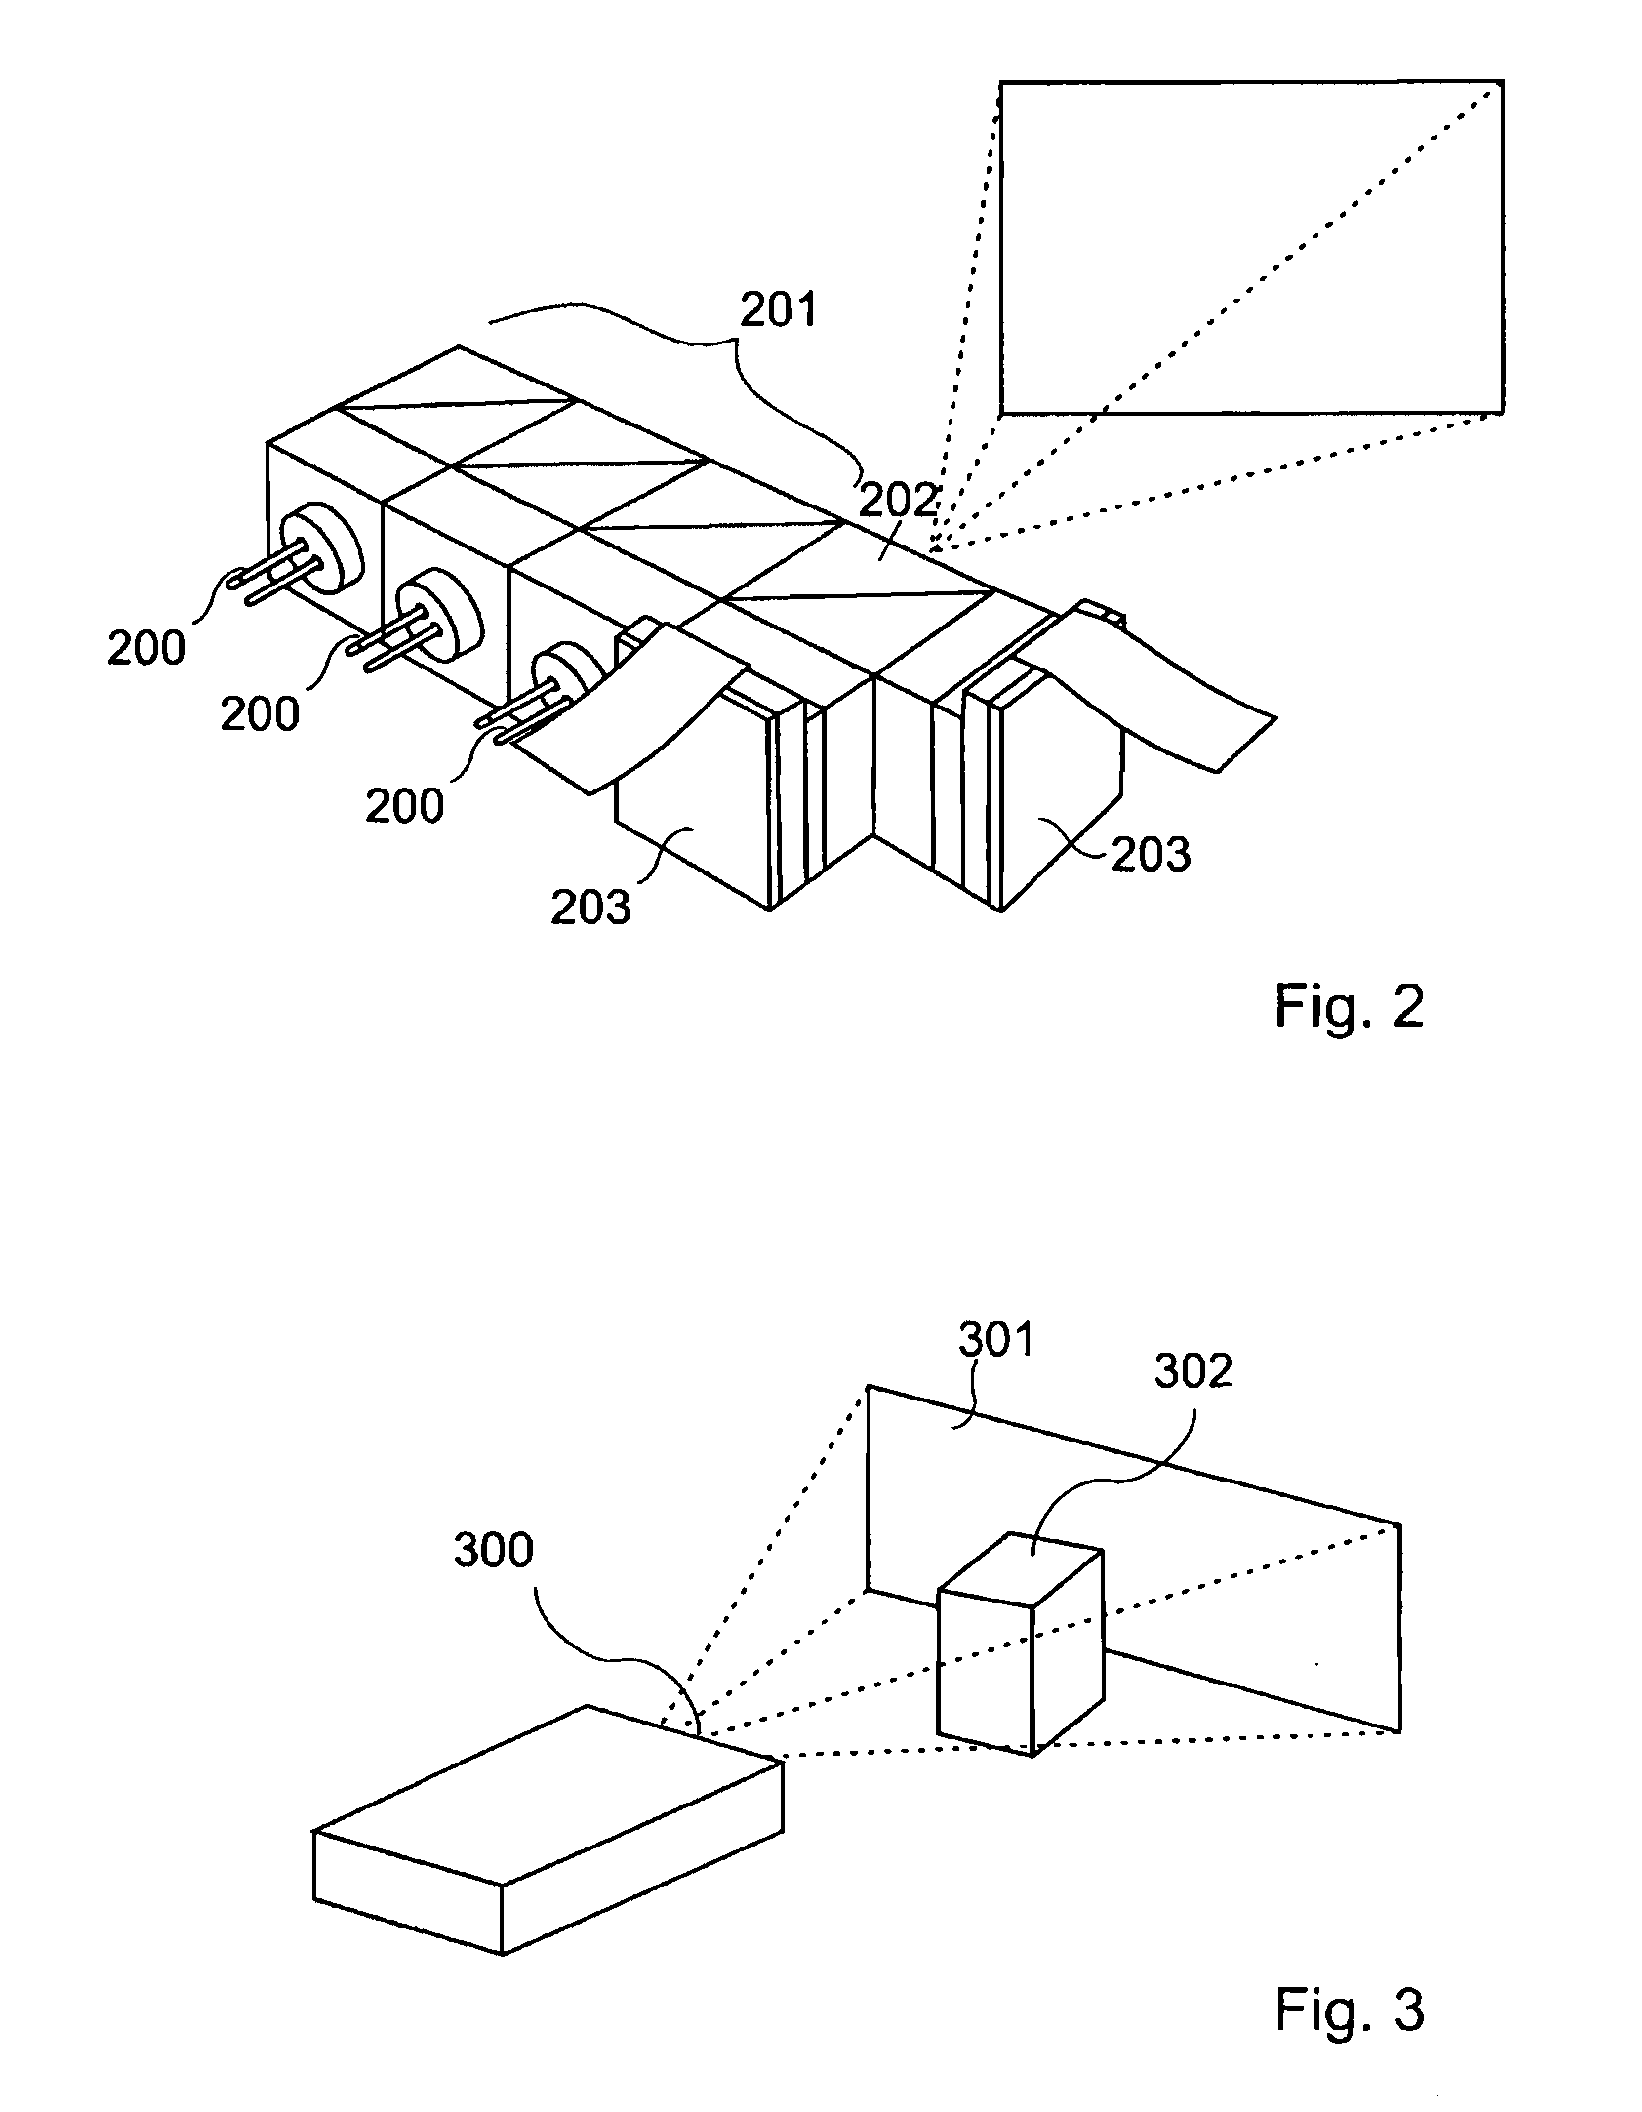 Optical micro-projection system and projection method